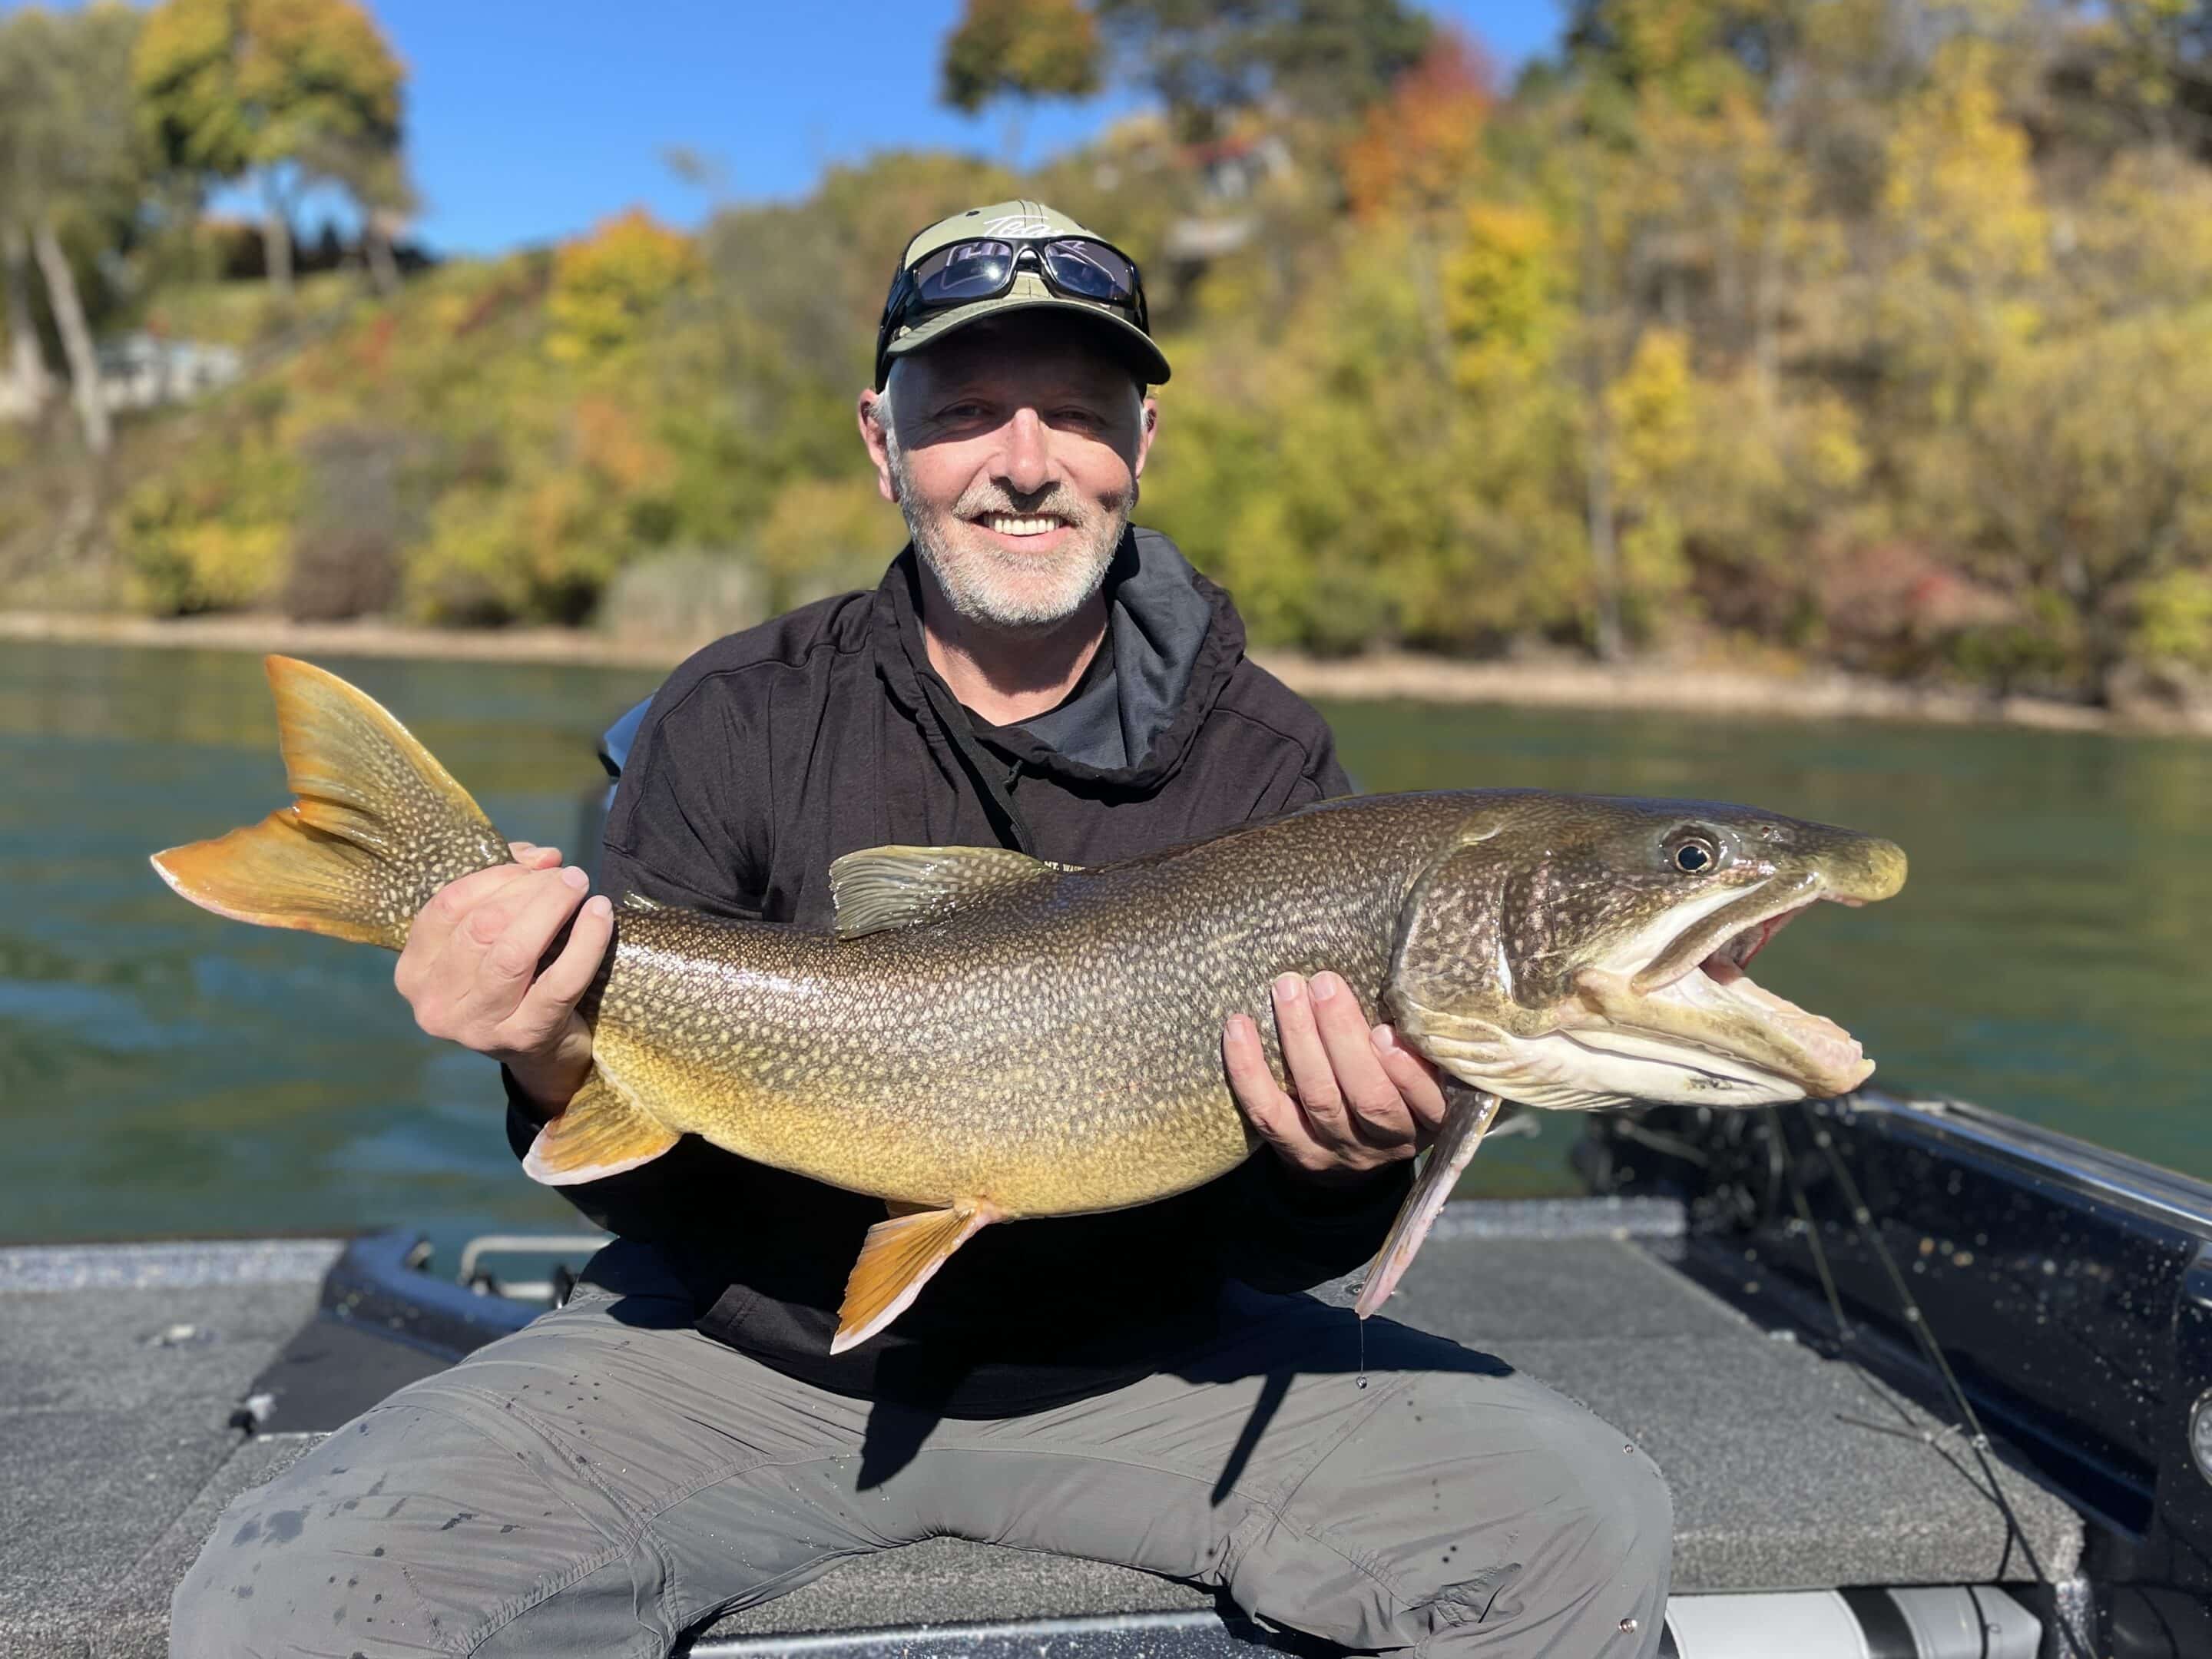 02CEDE81 46C8 4028 A266 0A7B849A96C4 scaled - Buffalo NY Fishing Report - 10/30/2022